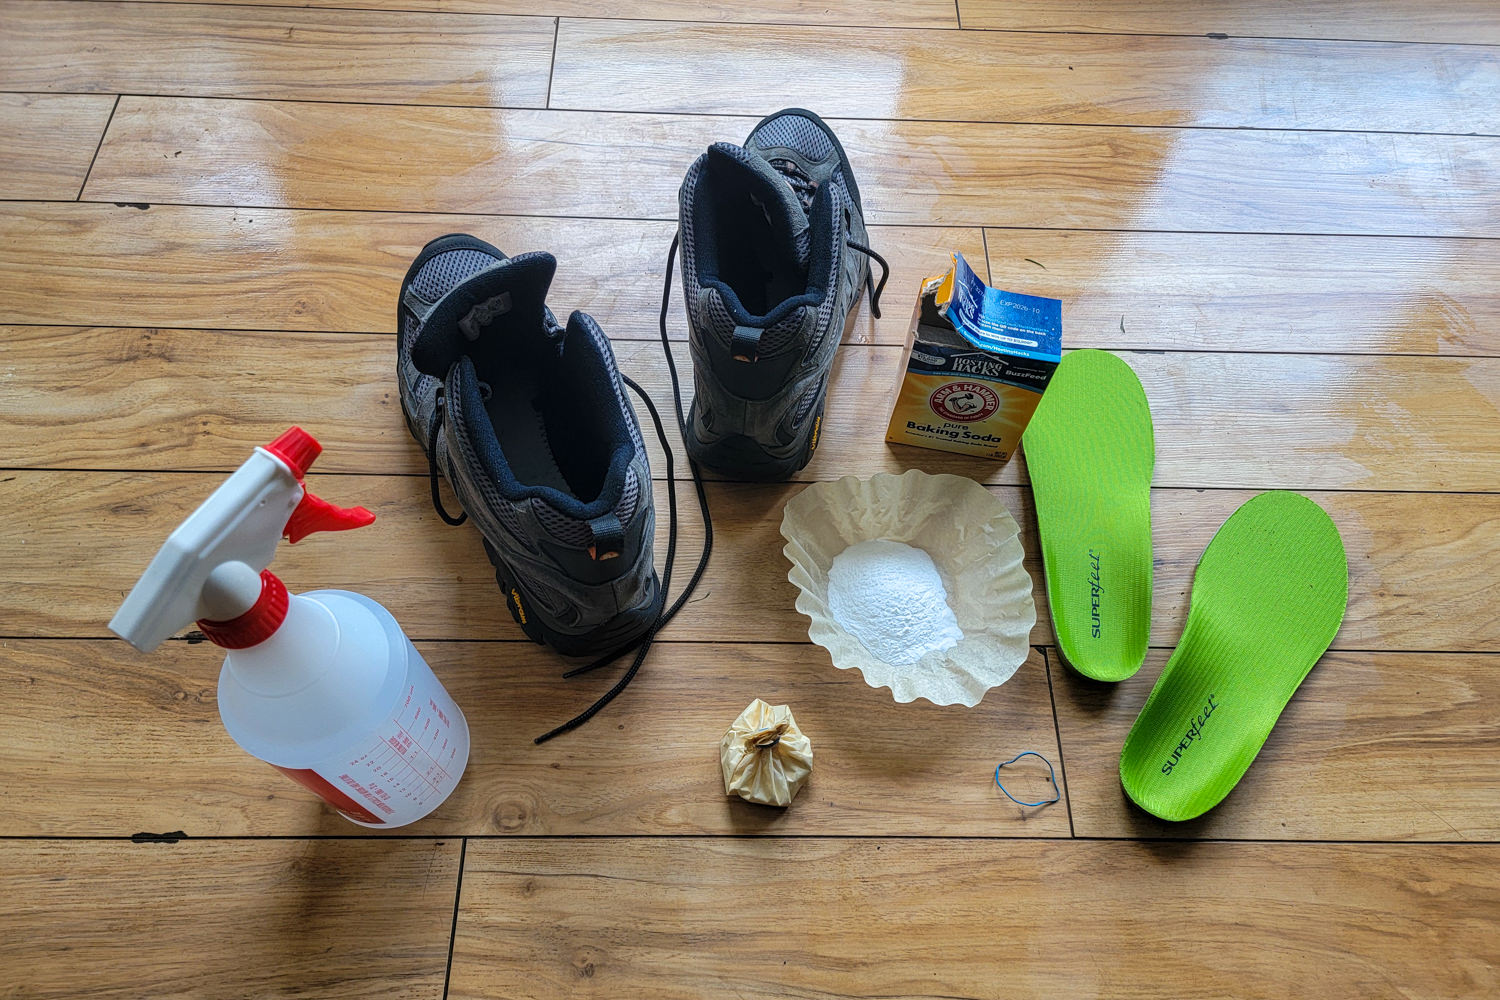 Looking down at a pair of Merrell Moab boots with a spray bottle full of diluted white vinegar, coffee filters filled with banking soda, and a pair of Superfeet insoles